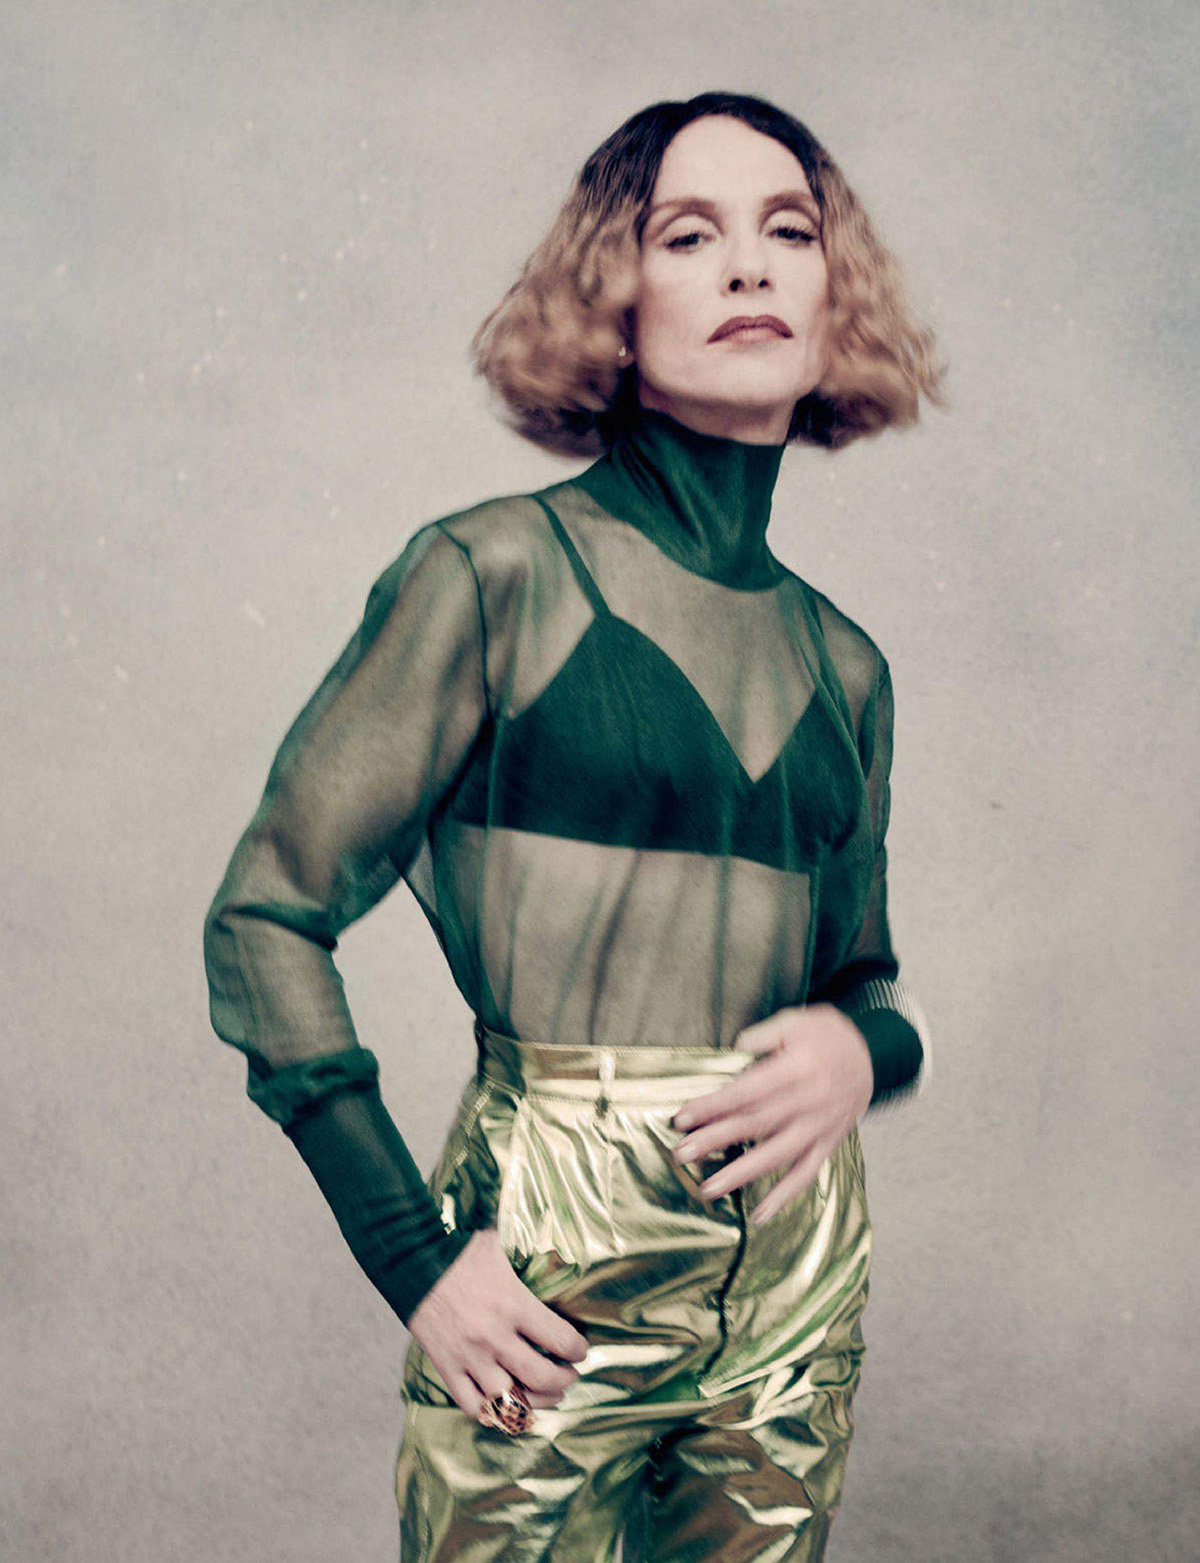 Isabelle Huppert covers Vogue France December 2021 January 2022 by Paolo Roversi